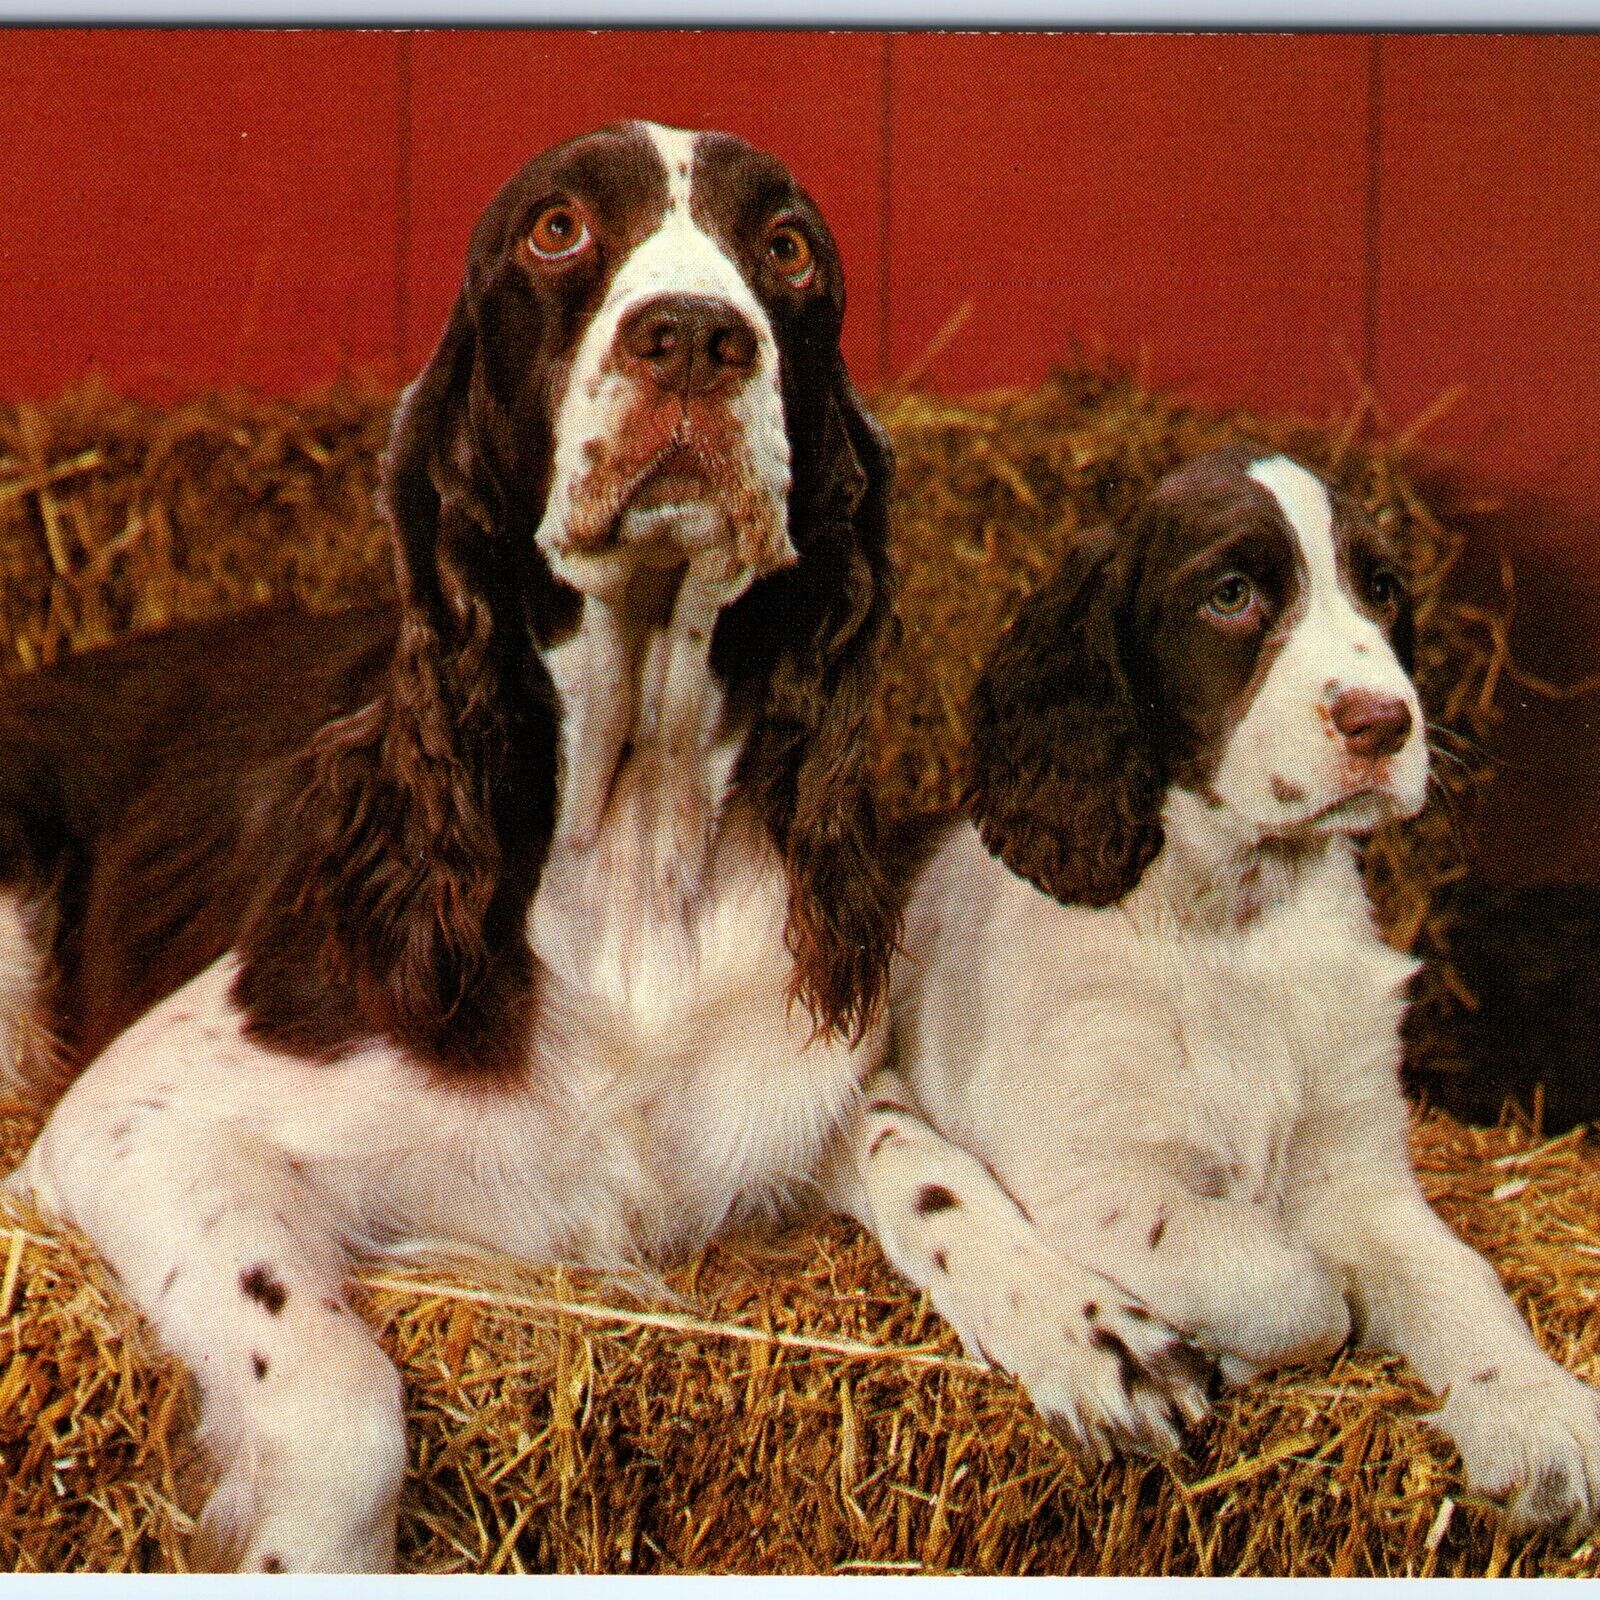 c1960s Cute Mother Dog & Puppy English Springer Spanel Adorable Pup Pet PC A232